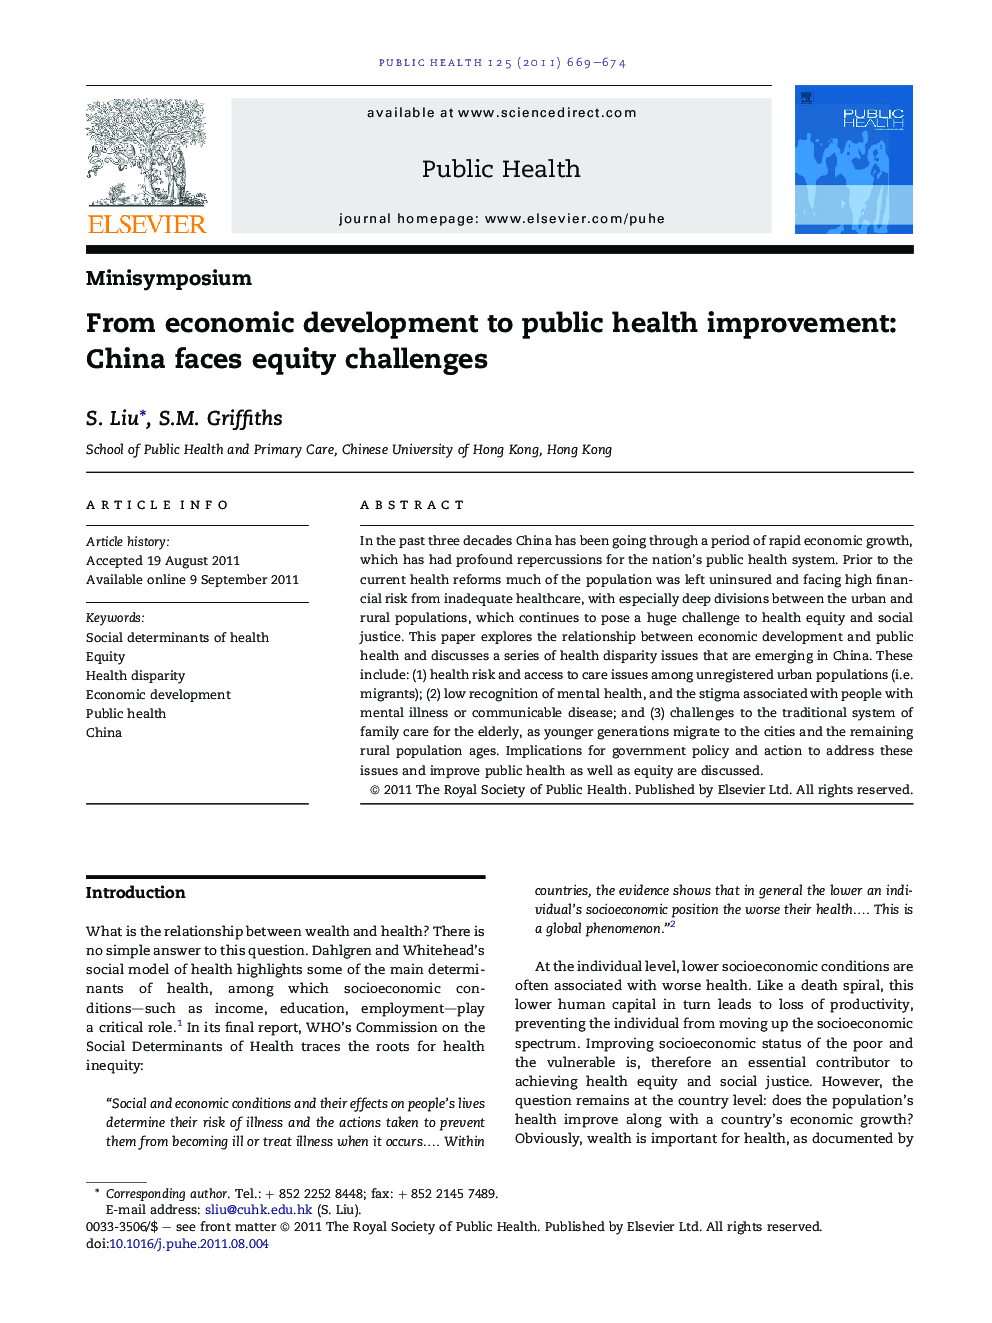 From economic development to public health improvement: China faces equity challenges